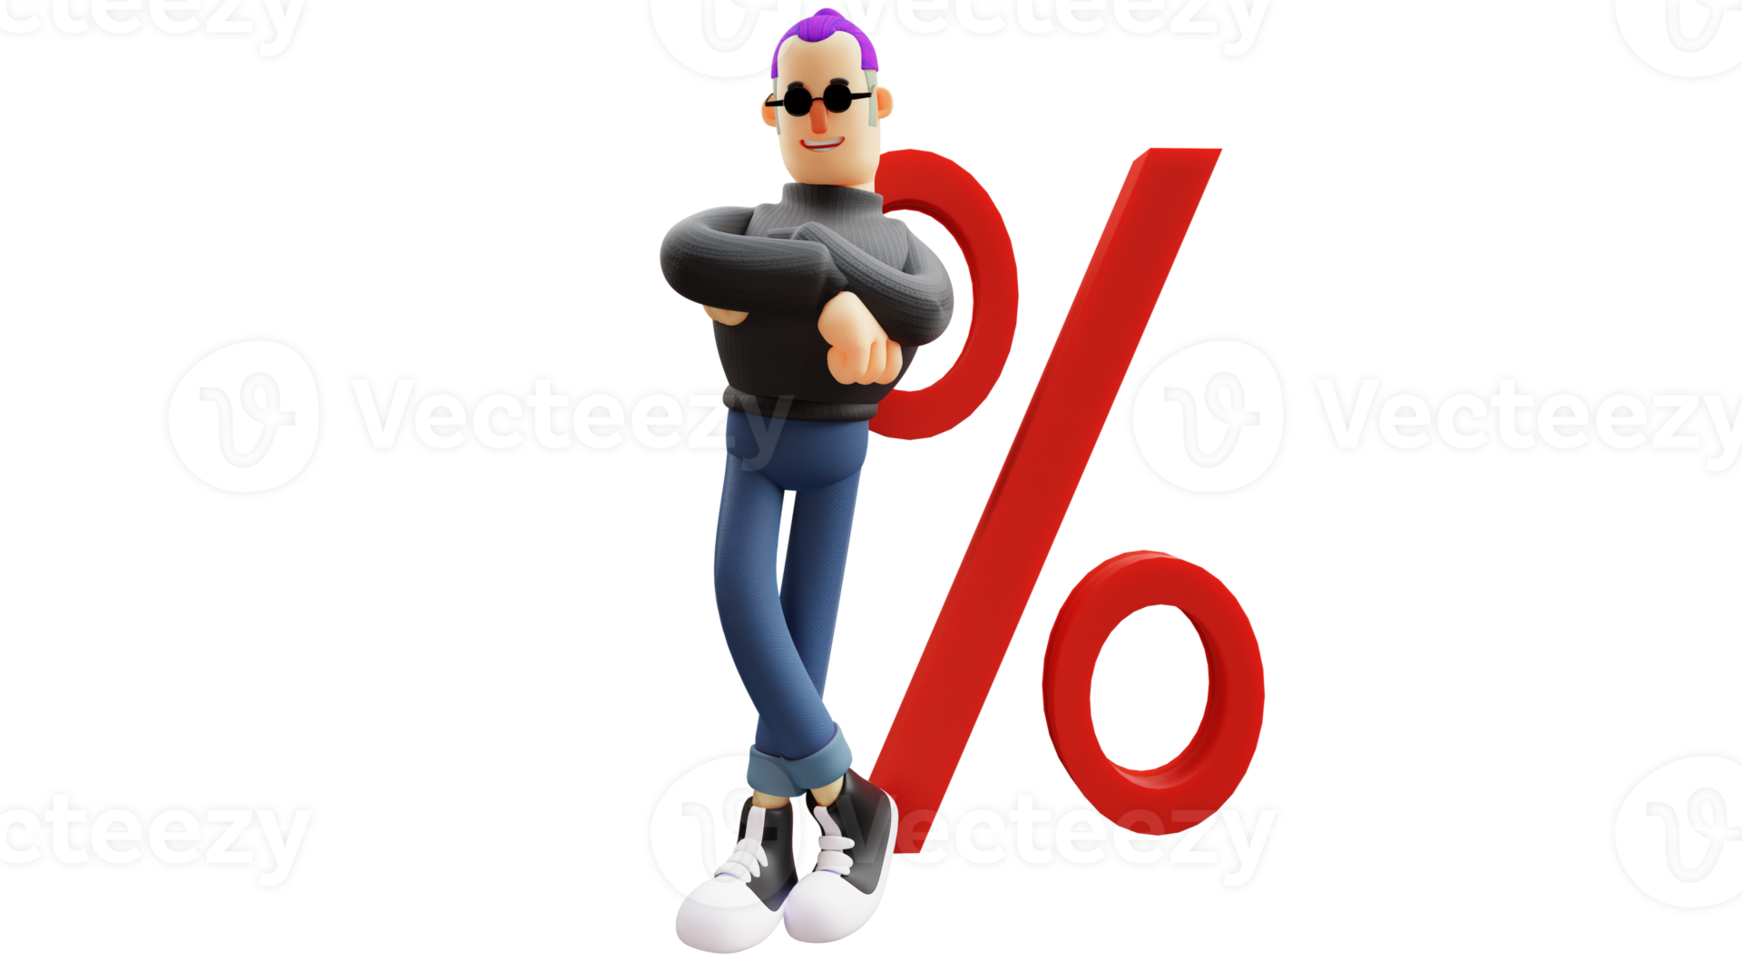 3D illustration. Cool Boy 3D cartoon character. Cool guy standing with his legs crossed. Handsome man wearing sunglasses with his arms crossed. 3D cartoon character png